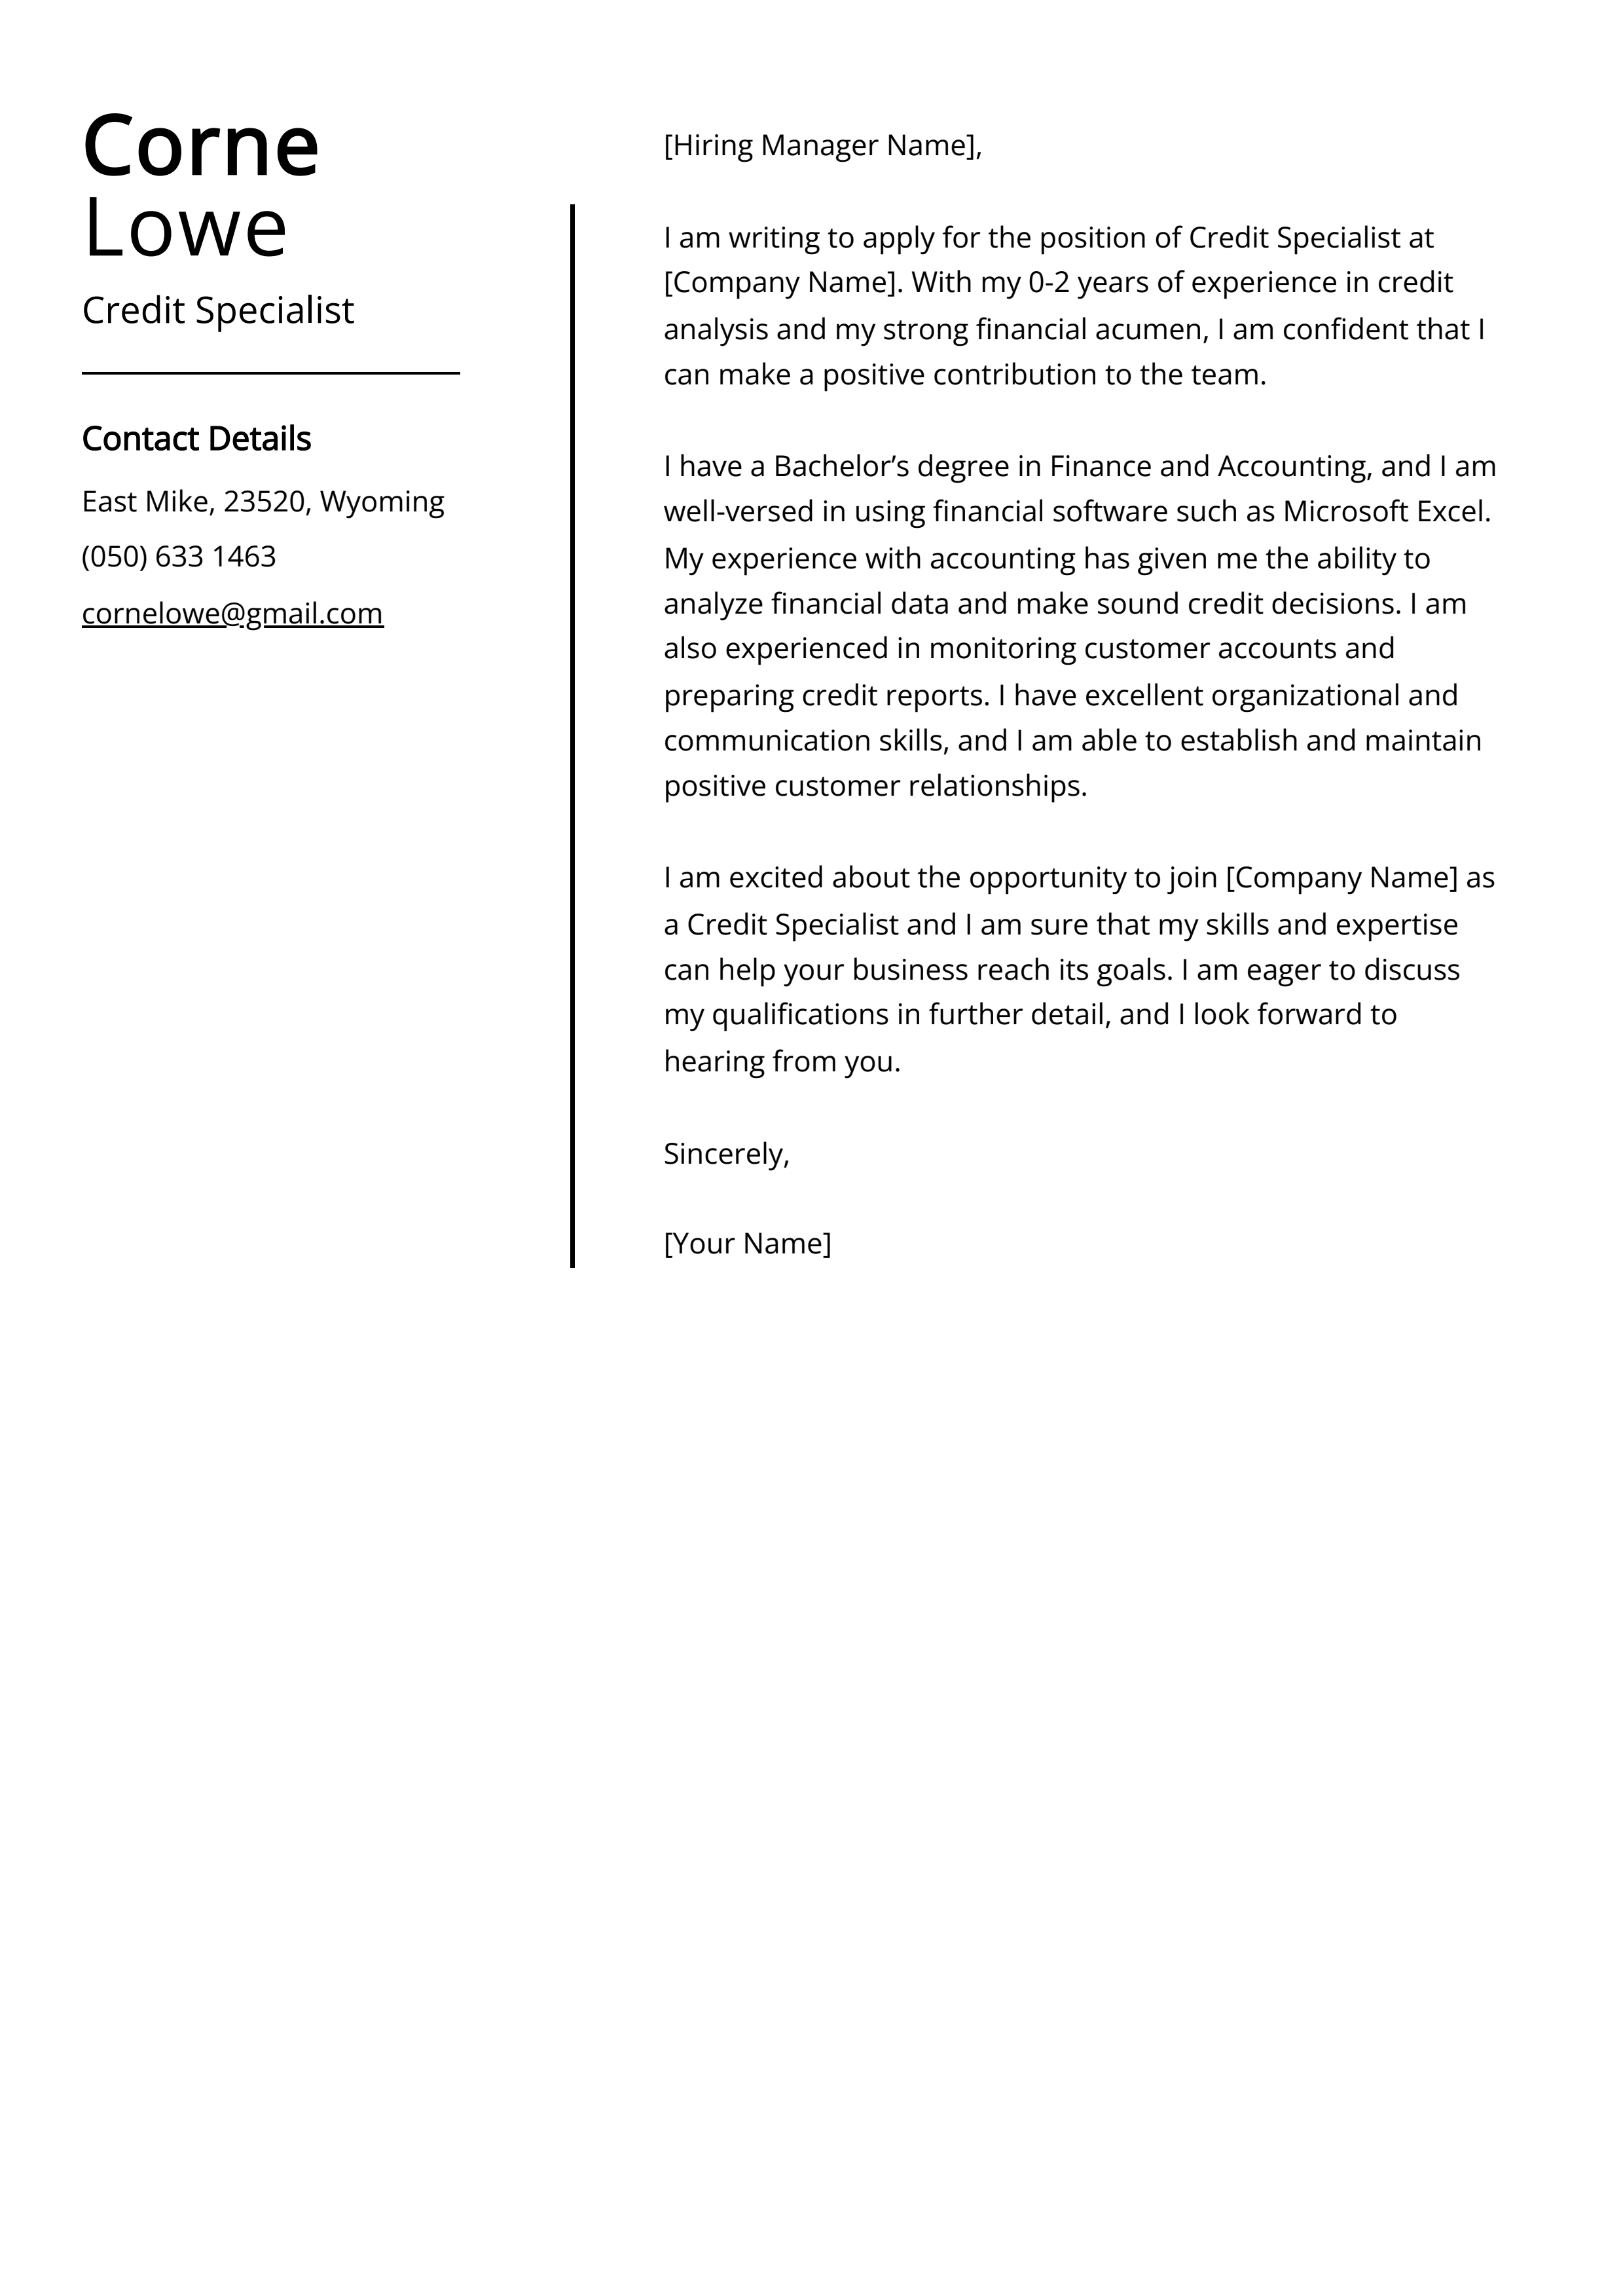 Credit Specialist Cover Letter Example